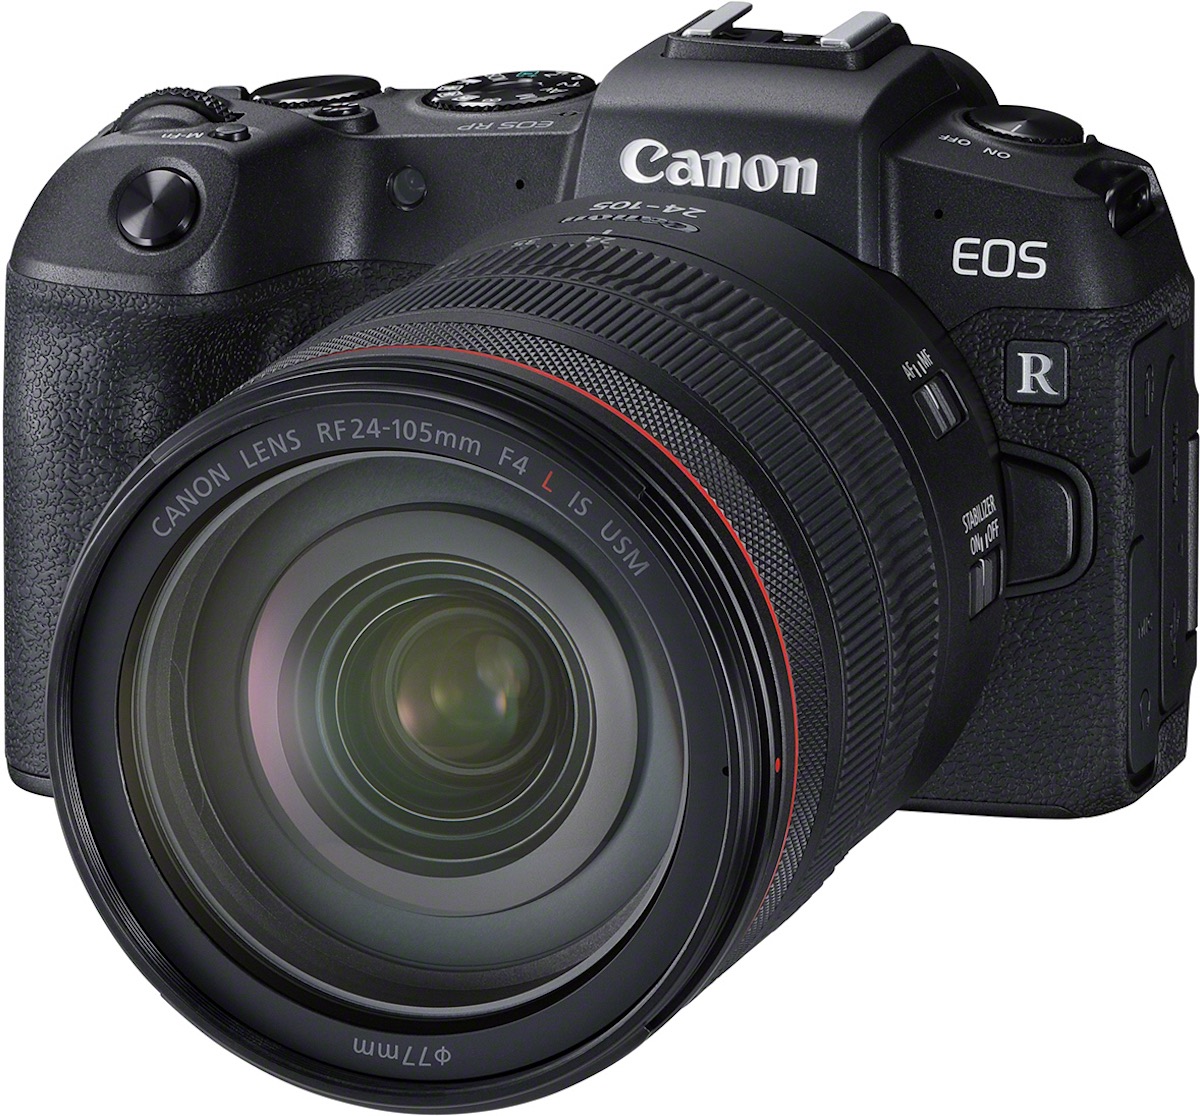 Canon EOS RP officially. The new full frame is even cheaper than we thought